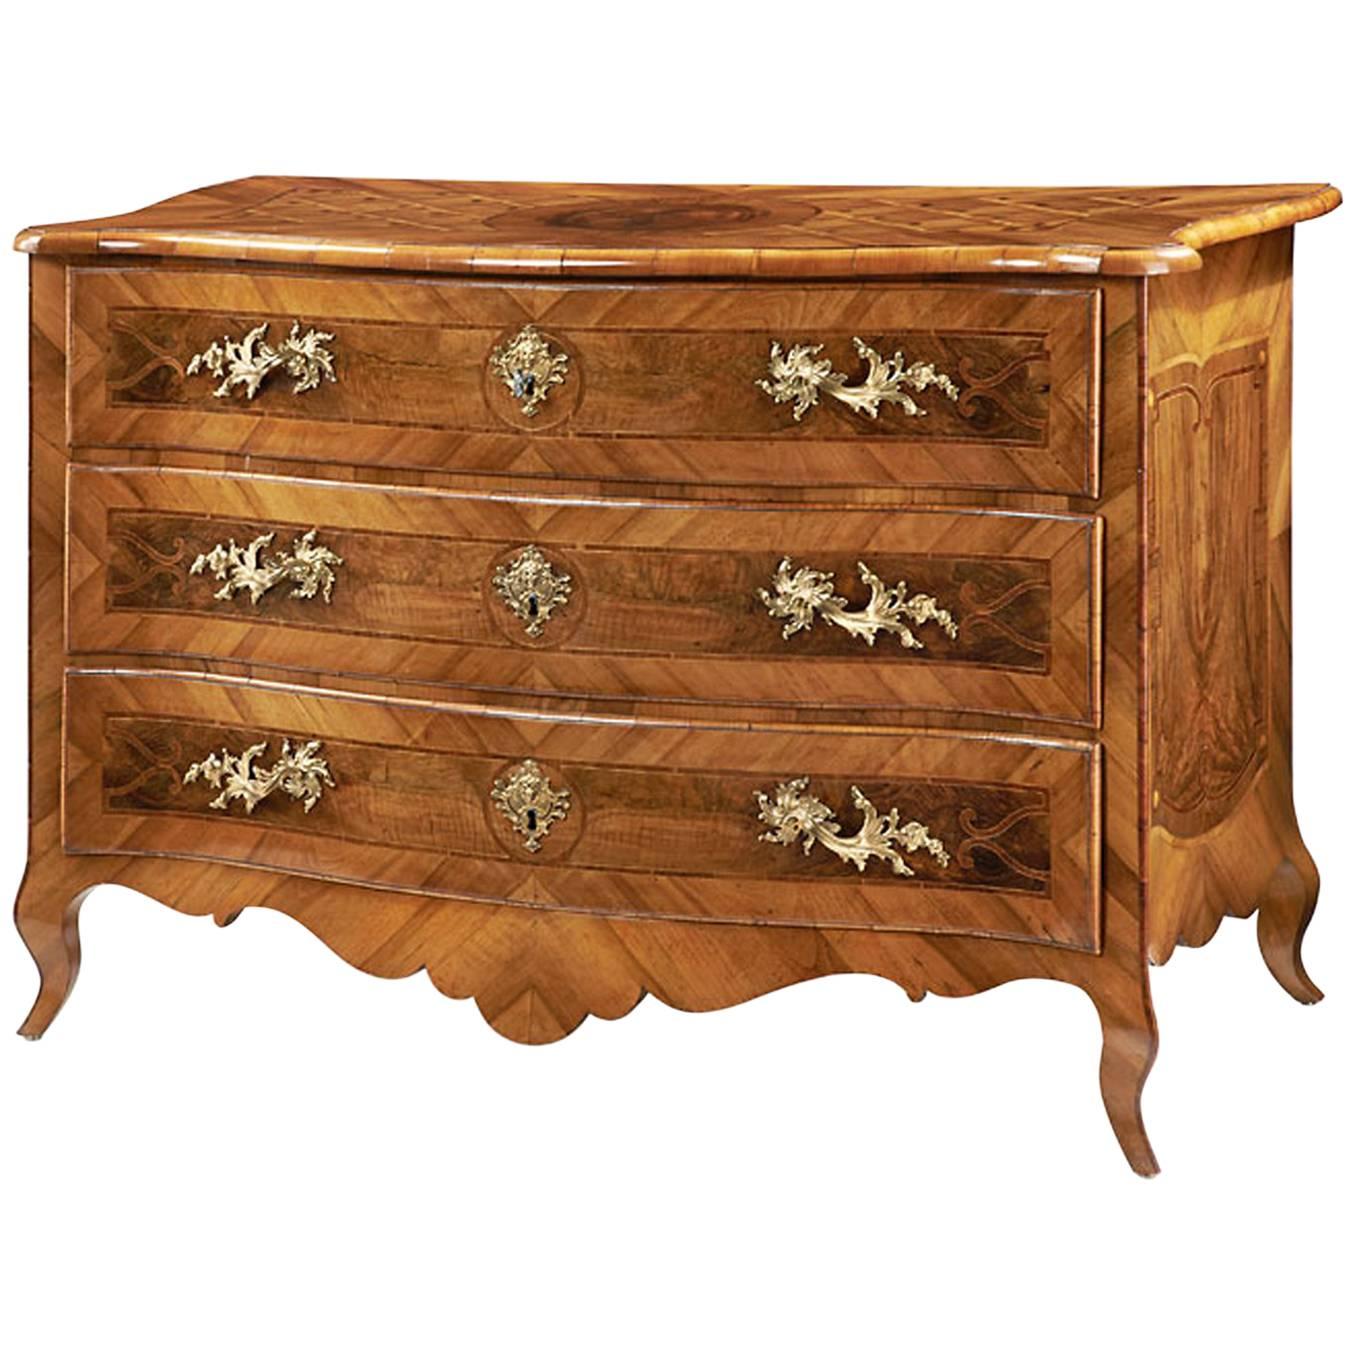 Baroque Chest of Drawers, South Germany, circa 1770